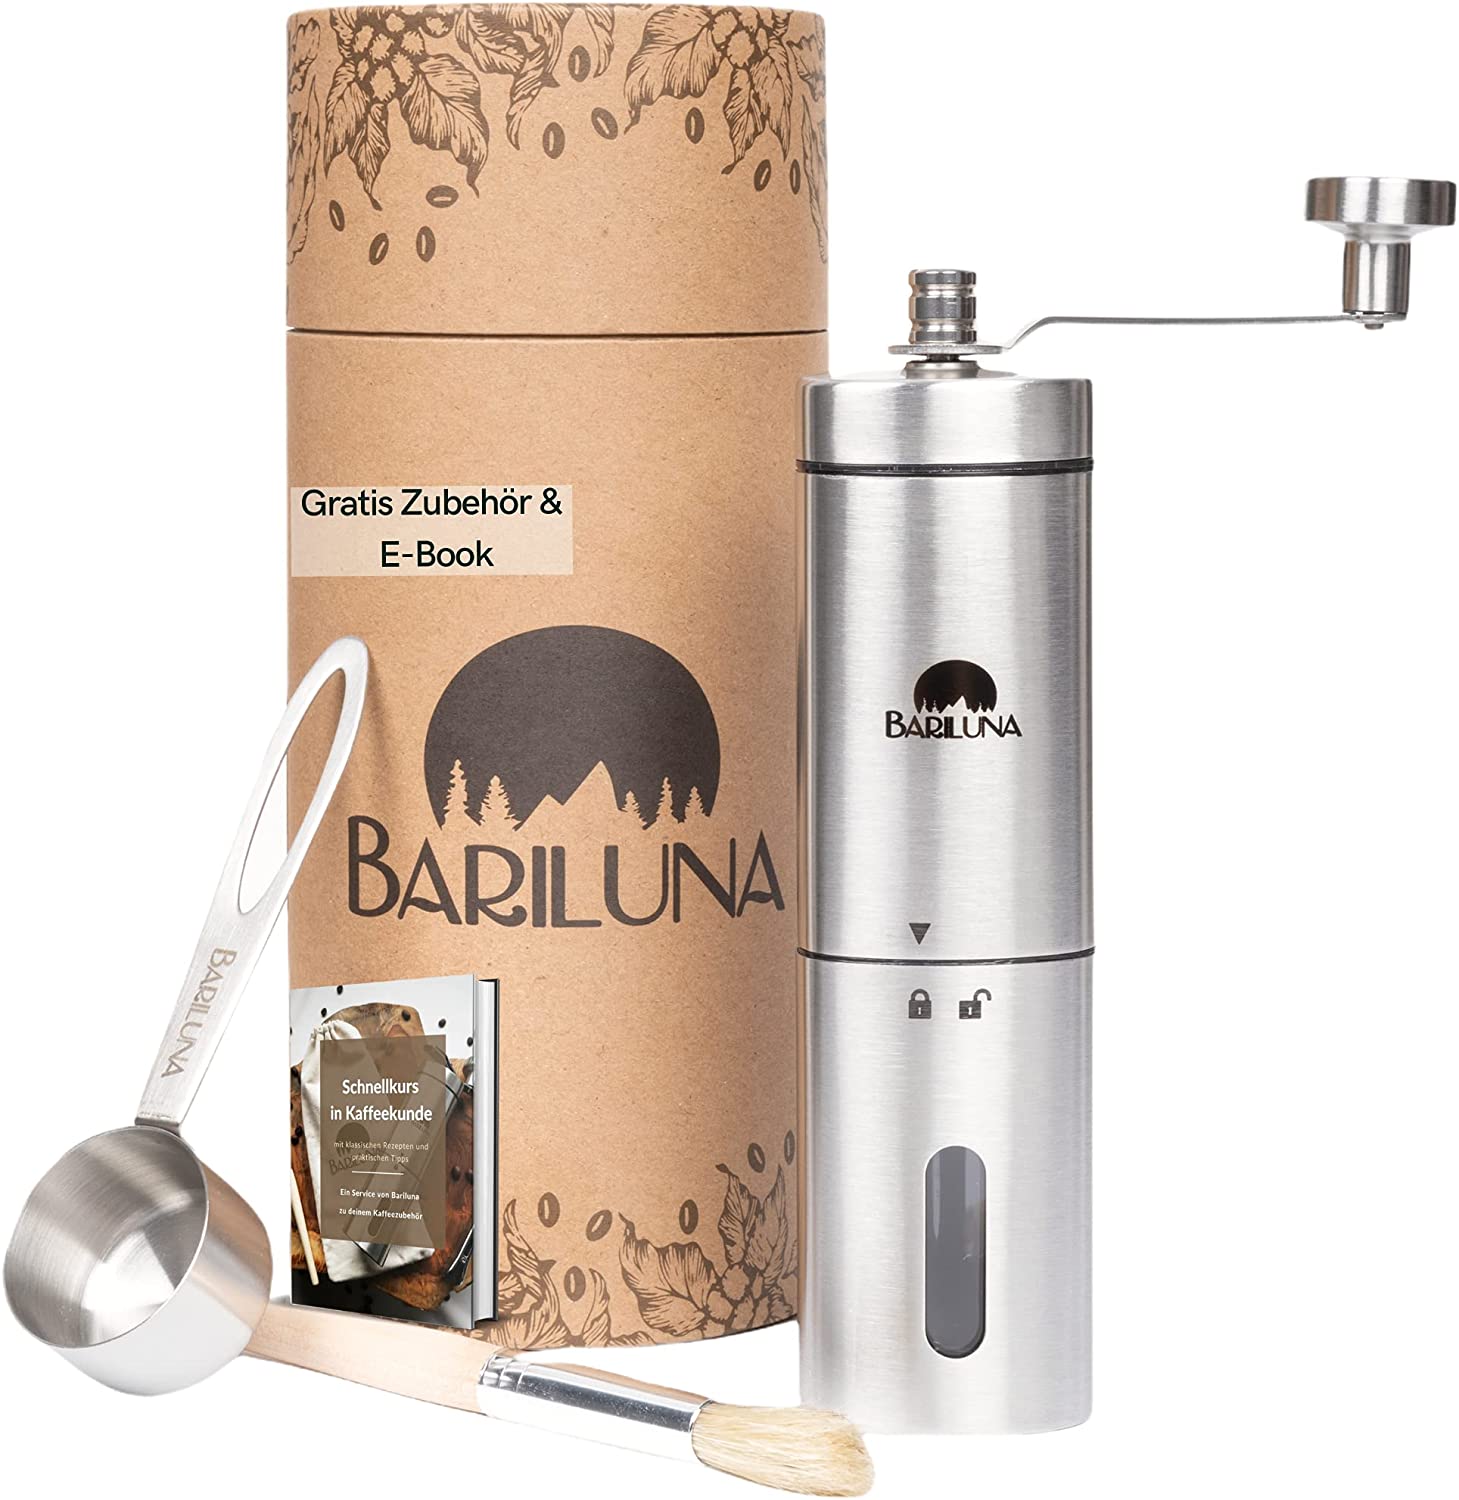 BARILUNA® Premium Manual Coffee Grinder with Ceramic Grinder | Hand Coffee Grinder Without Slipping | Espresso Grinder Made of High-Quality Stainless Steel | Grinding Setting | Coffee Grinder for Camping and Motorhome